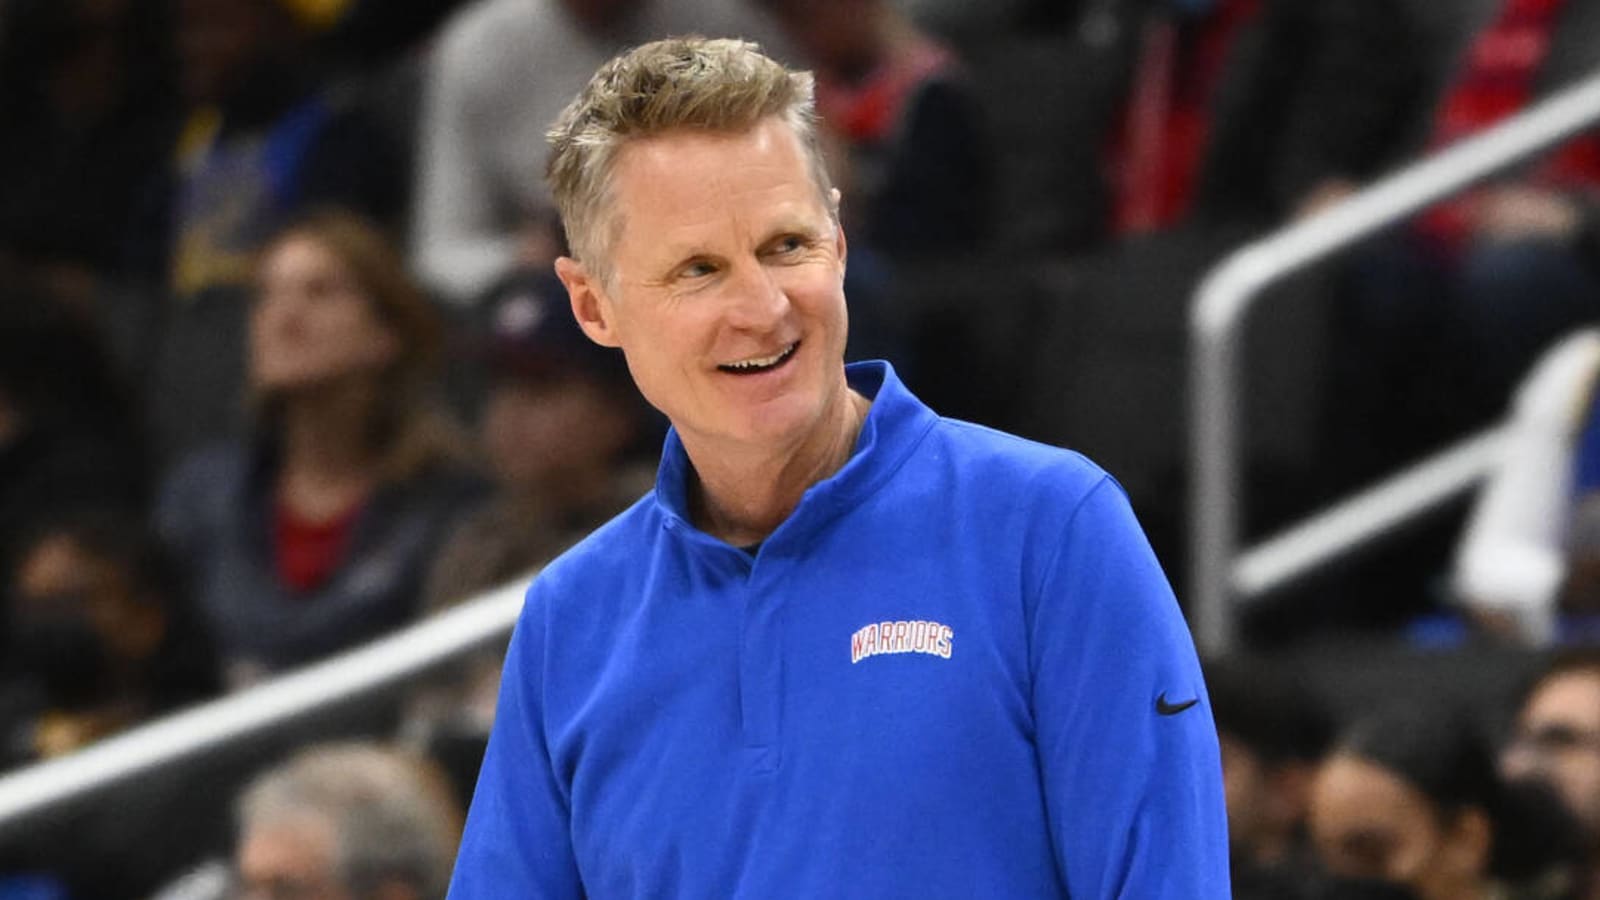 Kerr jokes that his attempt to watch Game 6 with wife didn't go well